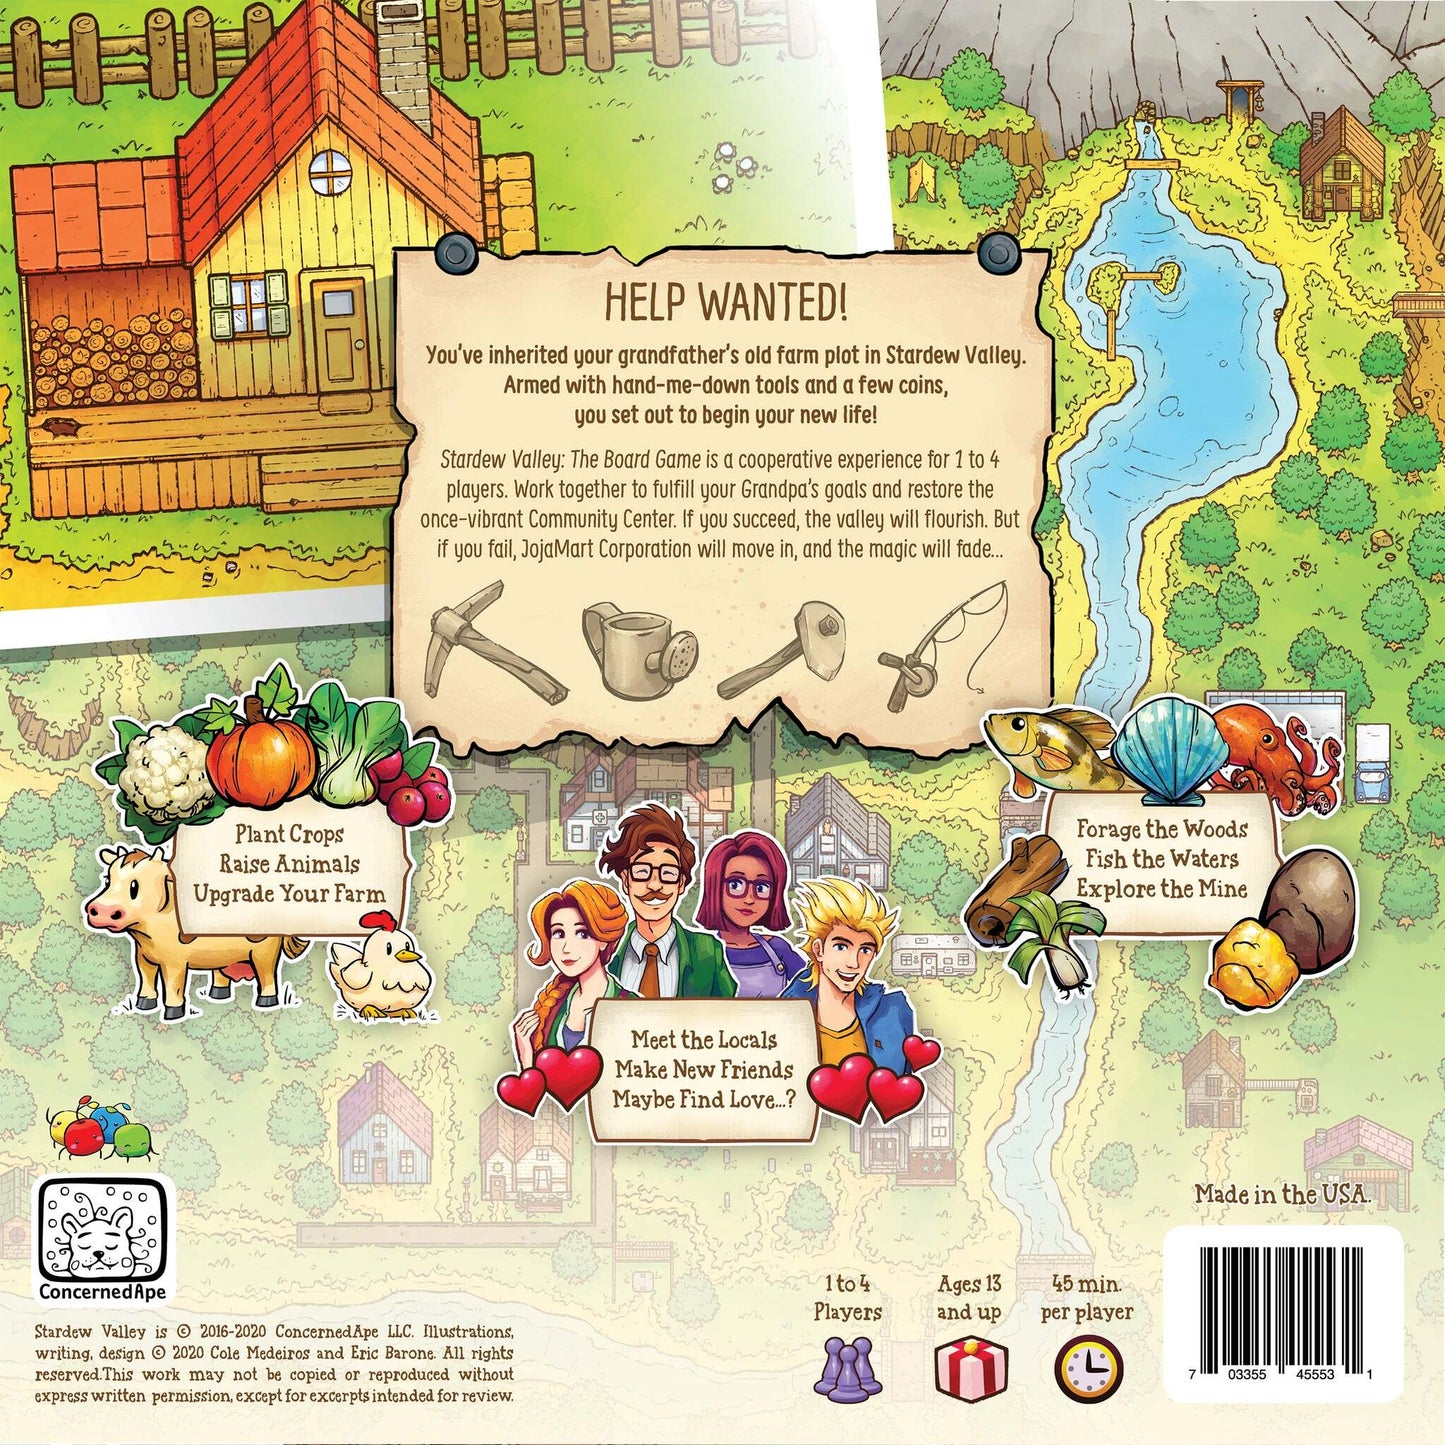 Stardew Valley: The Board Game back of box